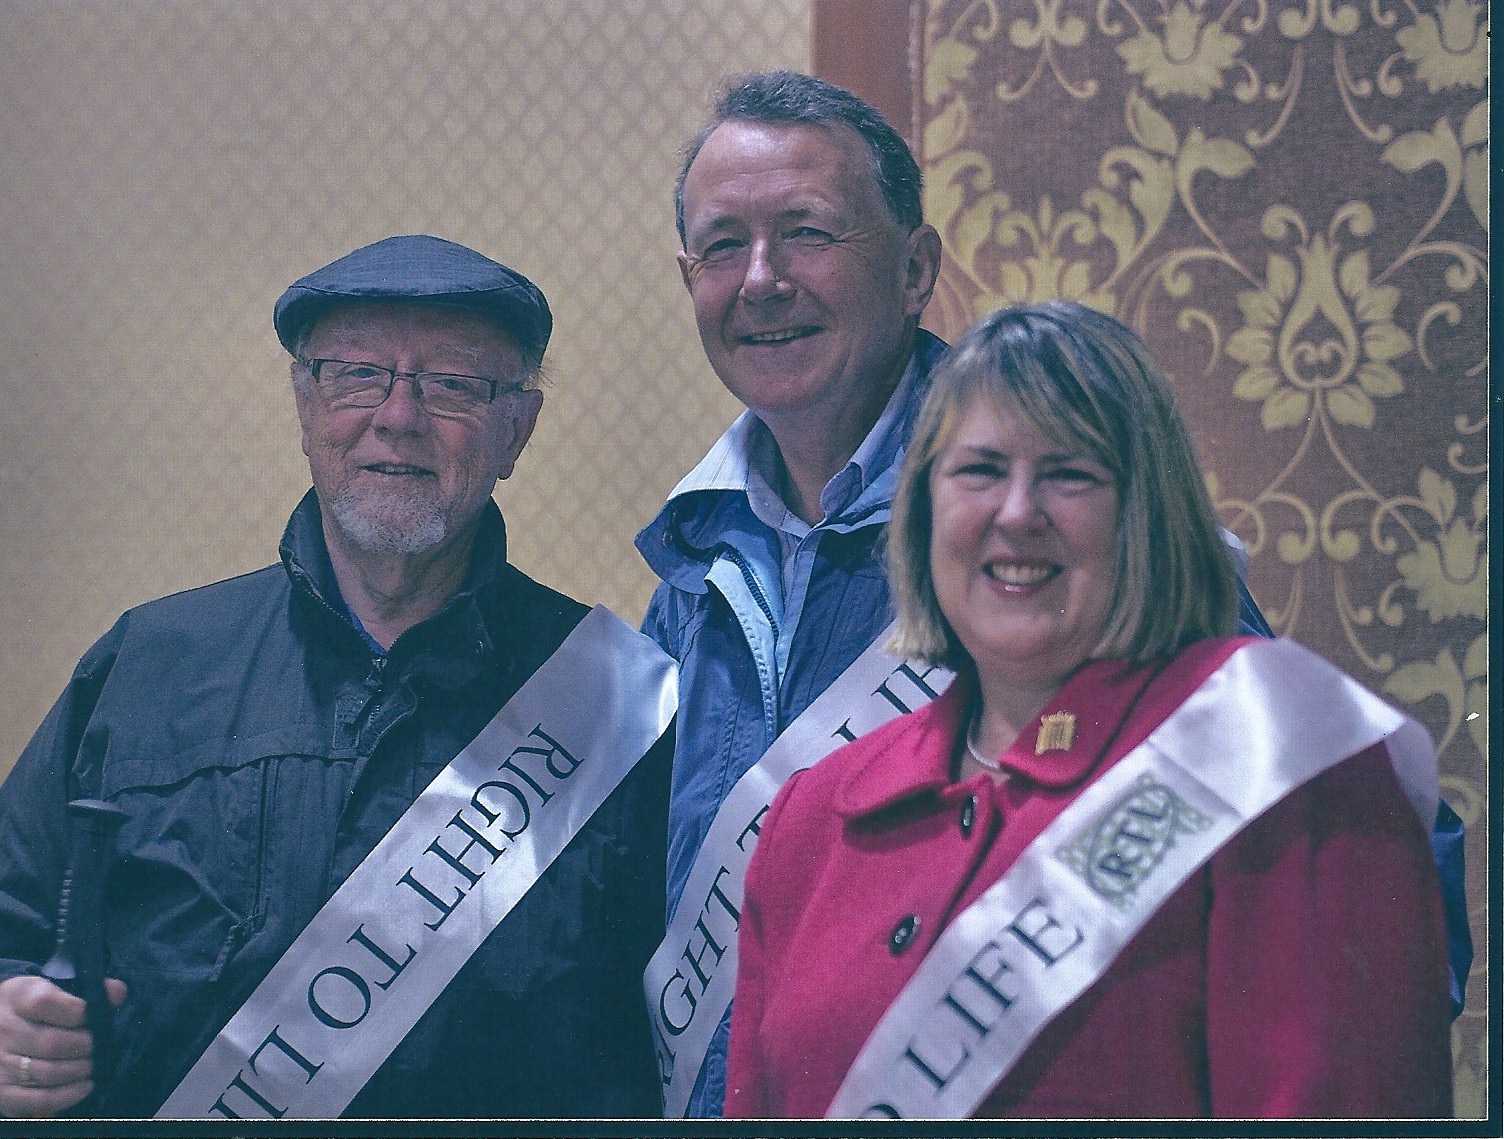 With Jim Dobbin MP and Fiona Bruce MP, Co-Chairmen of the All Party Parliamentary pro Life Group on the 2012 Right To Life Sponsored walk in the Ribble Valley